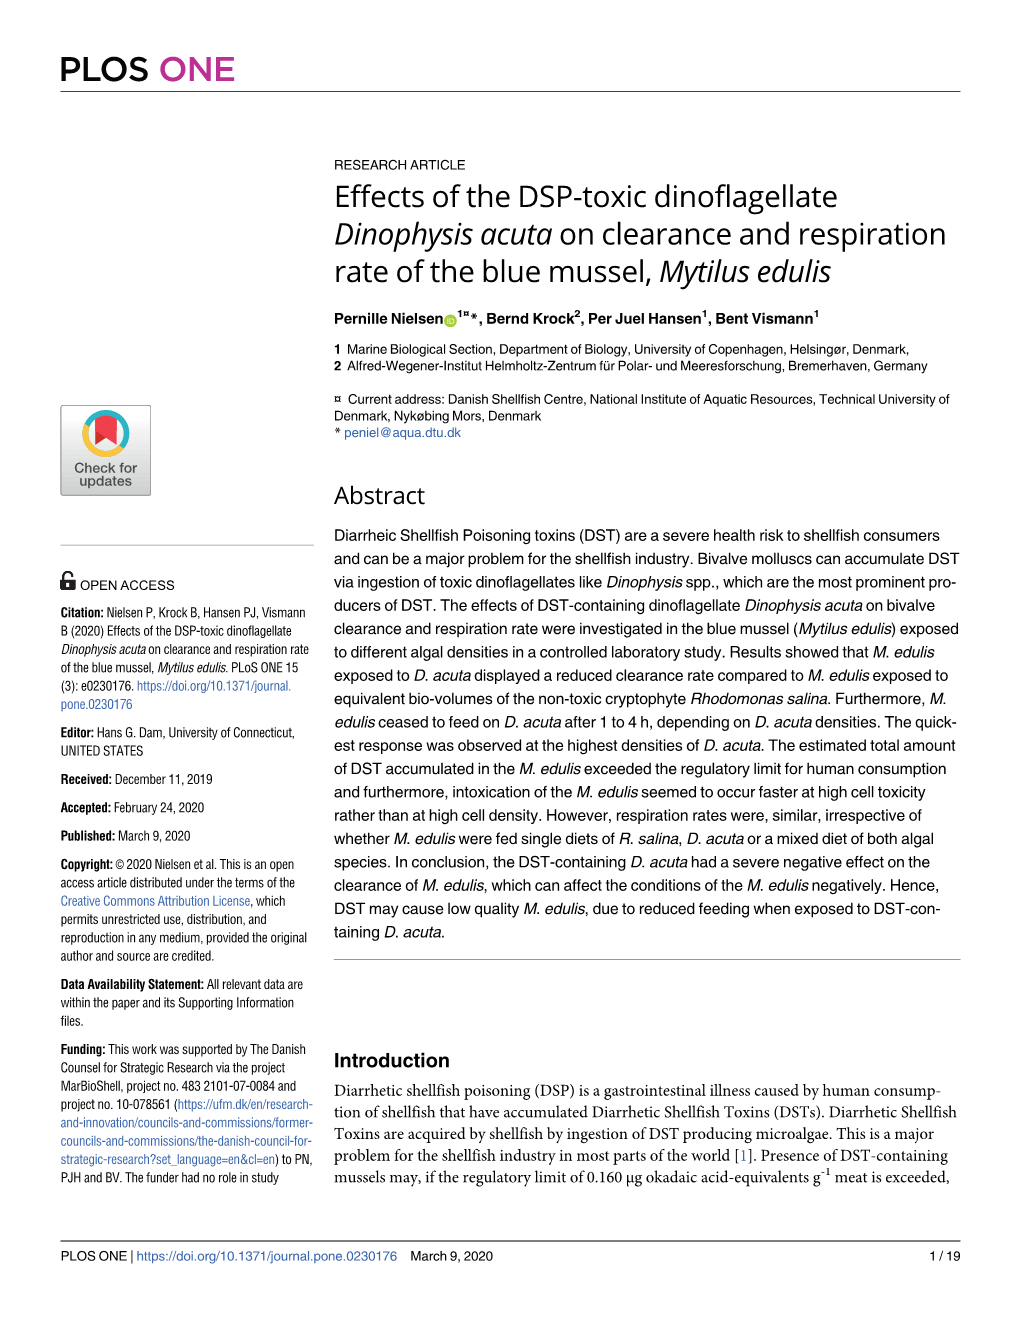 Effects of the DSP-Toxic Dinoflagellate Dinophysis Acuta on Clearance and Respiration Rate of the Blue Mussel, Mytilus Edulis